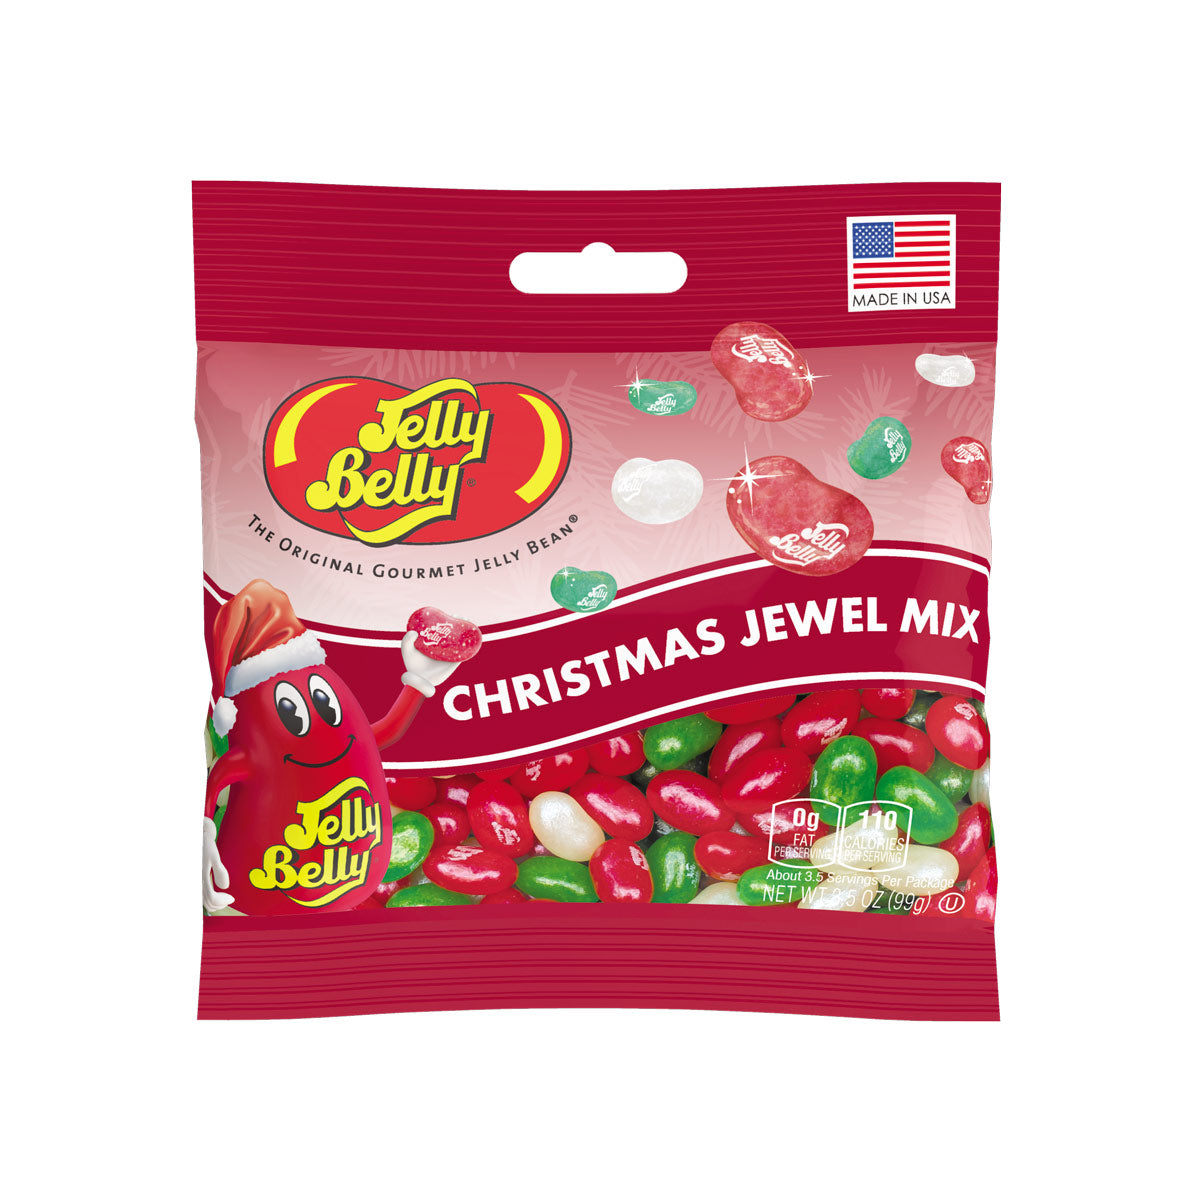 JELLY BELLY CHRISTMAS JEWEL MIX – The Penny Candy Store